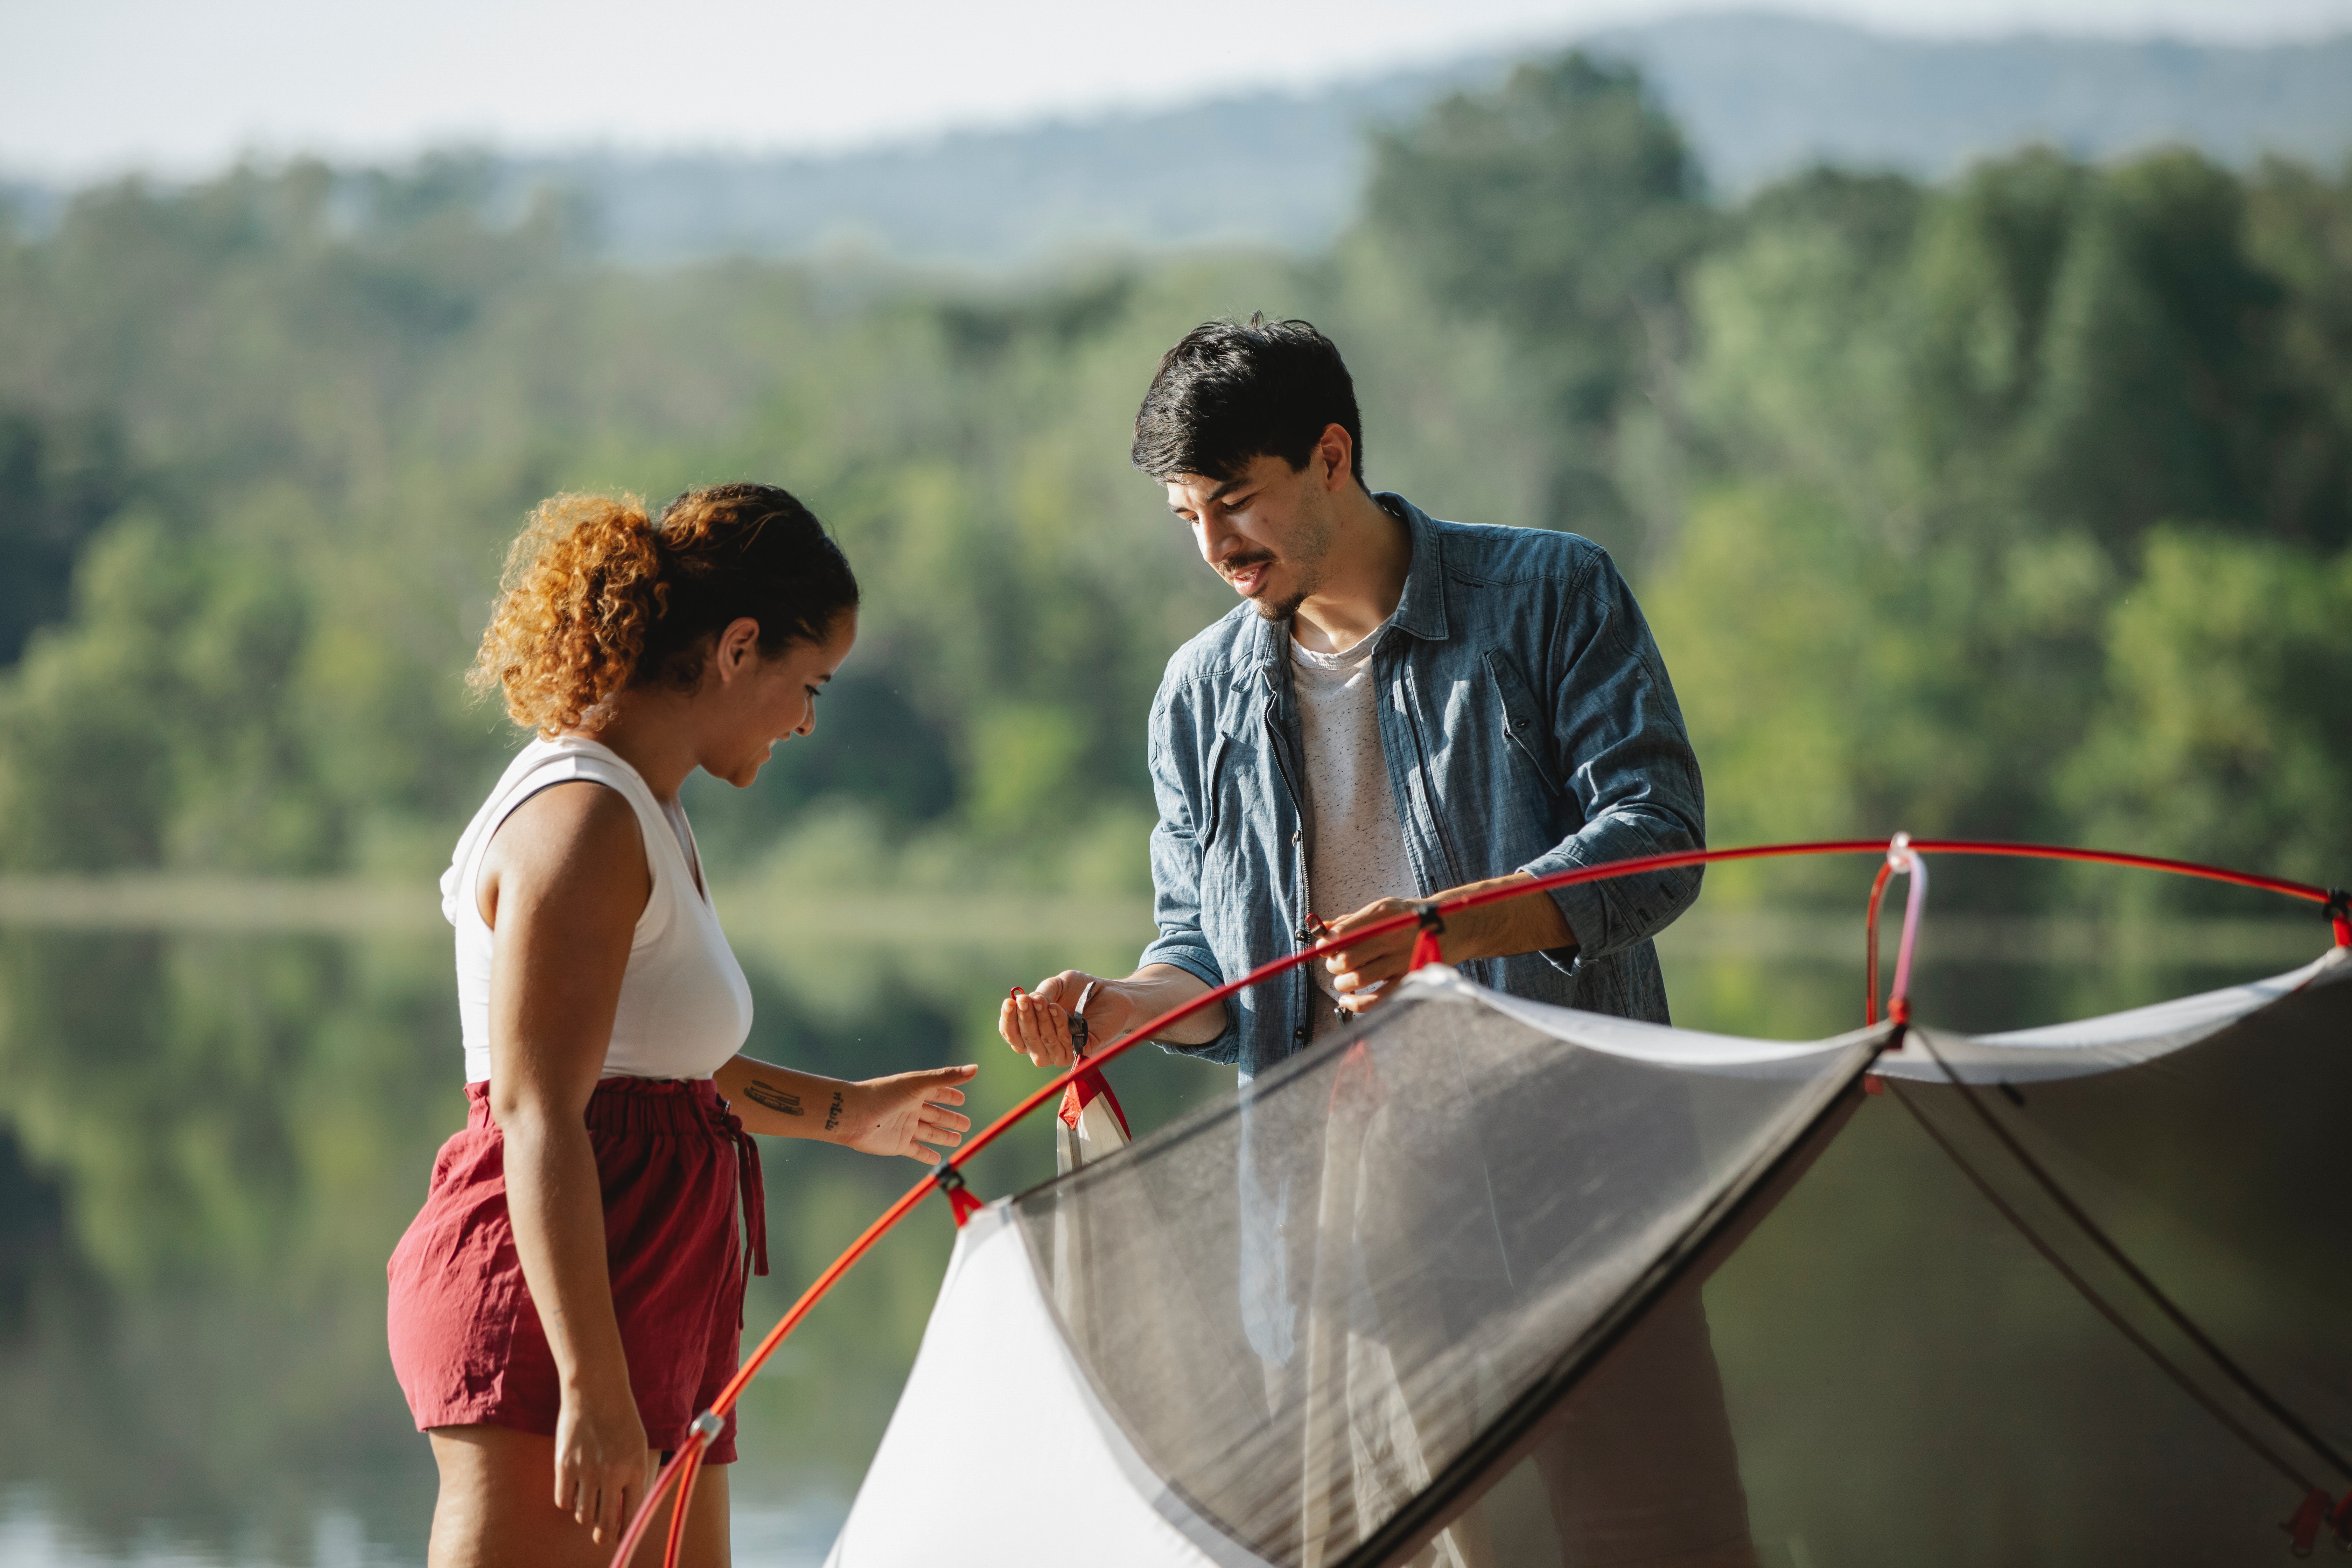 A woman and man setting up a tent together, with a lake and trees in the background.